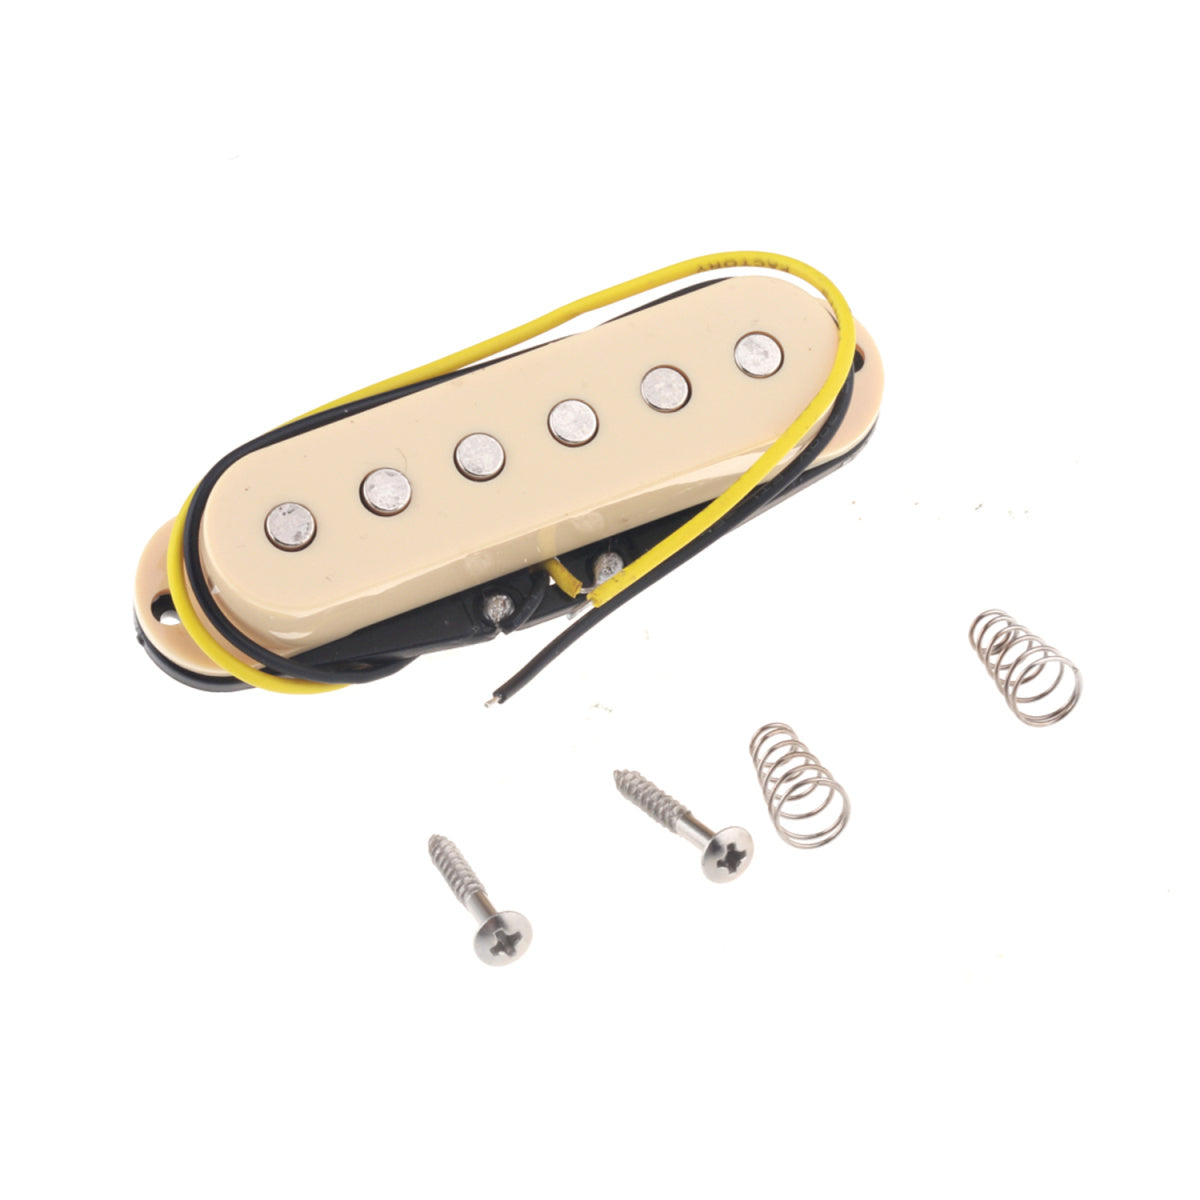 Musiclily 52mm Guitar Single coil Bridge Pickup for Strat or Squier Style, Cream